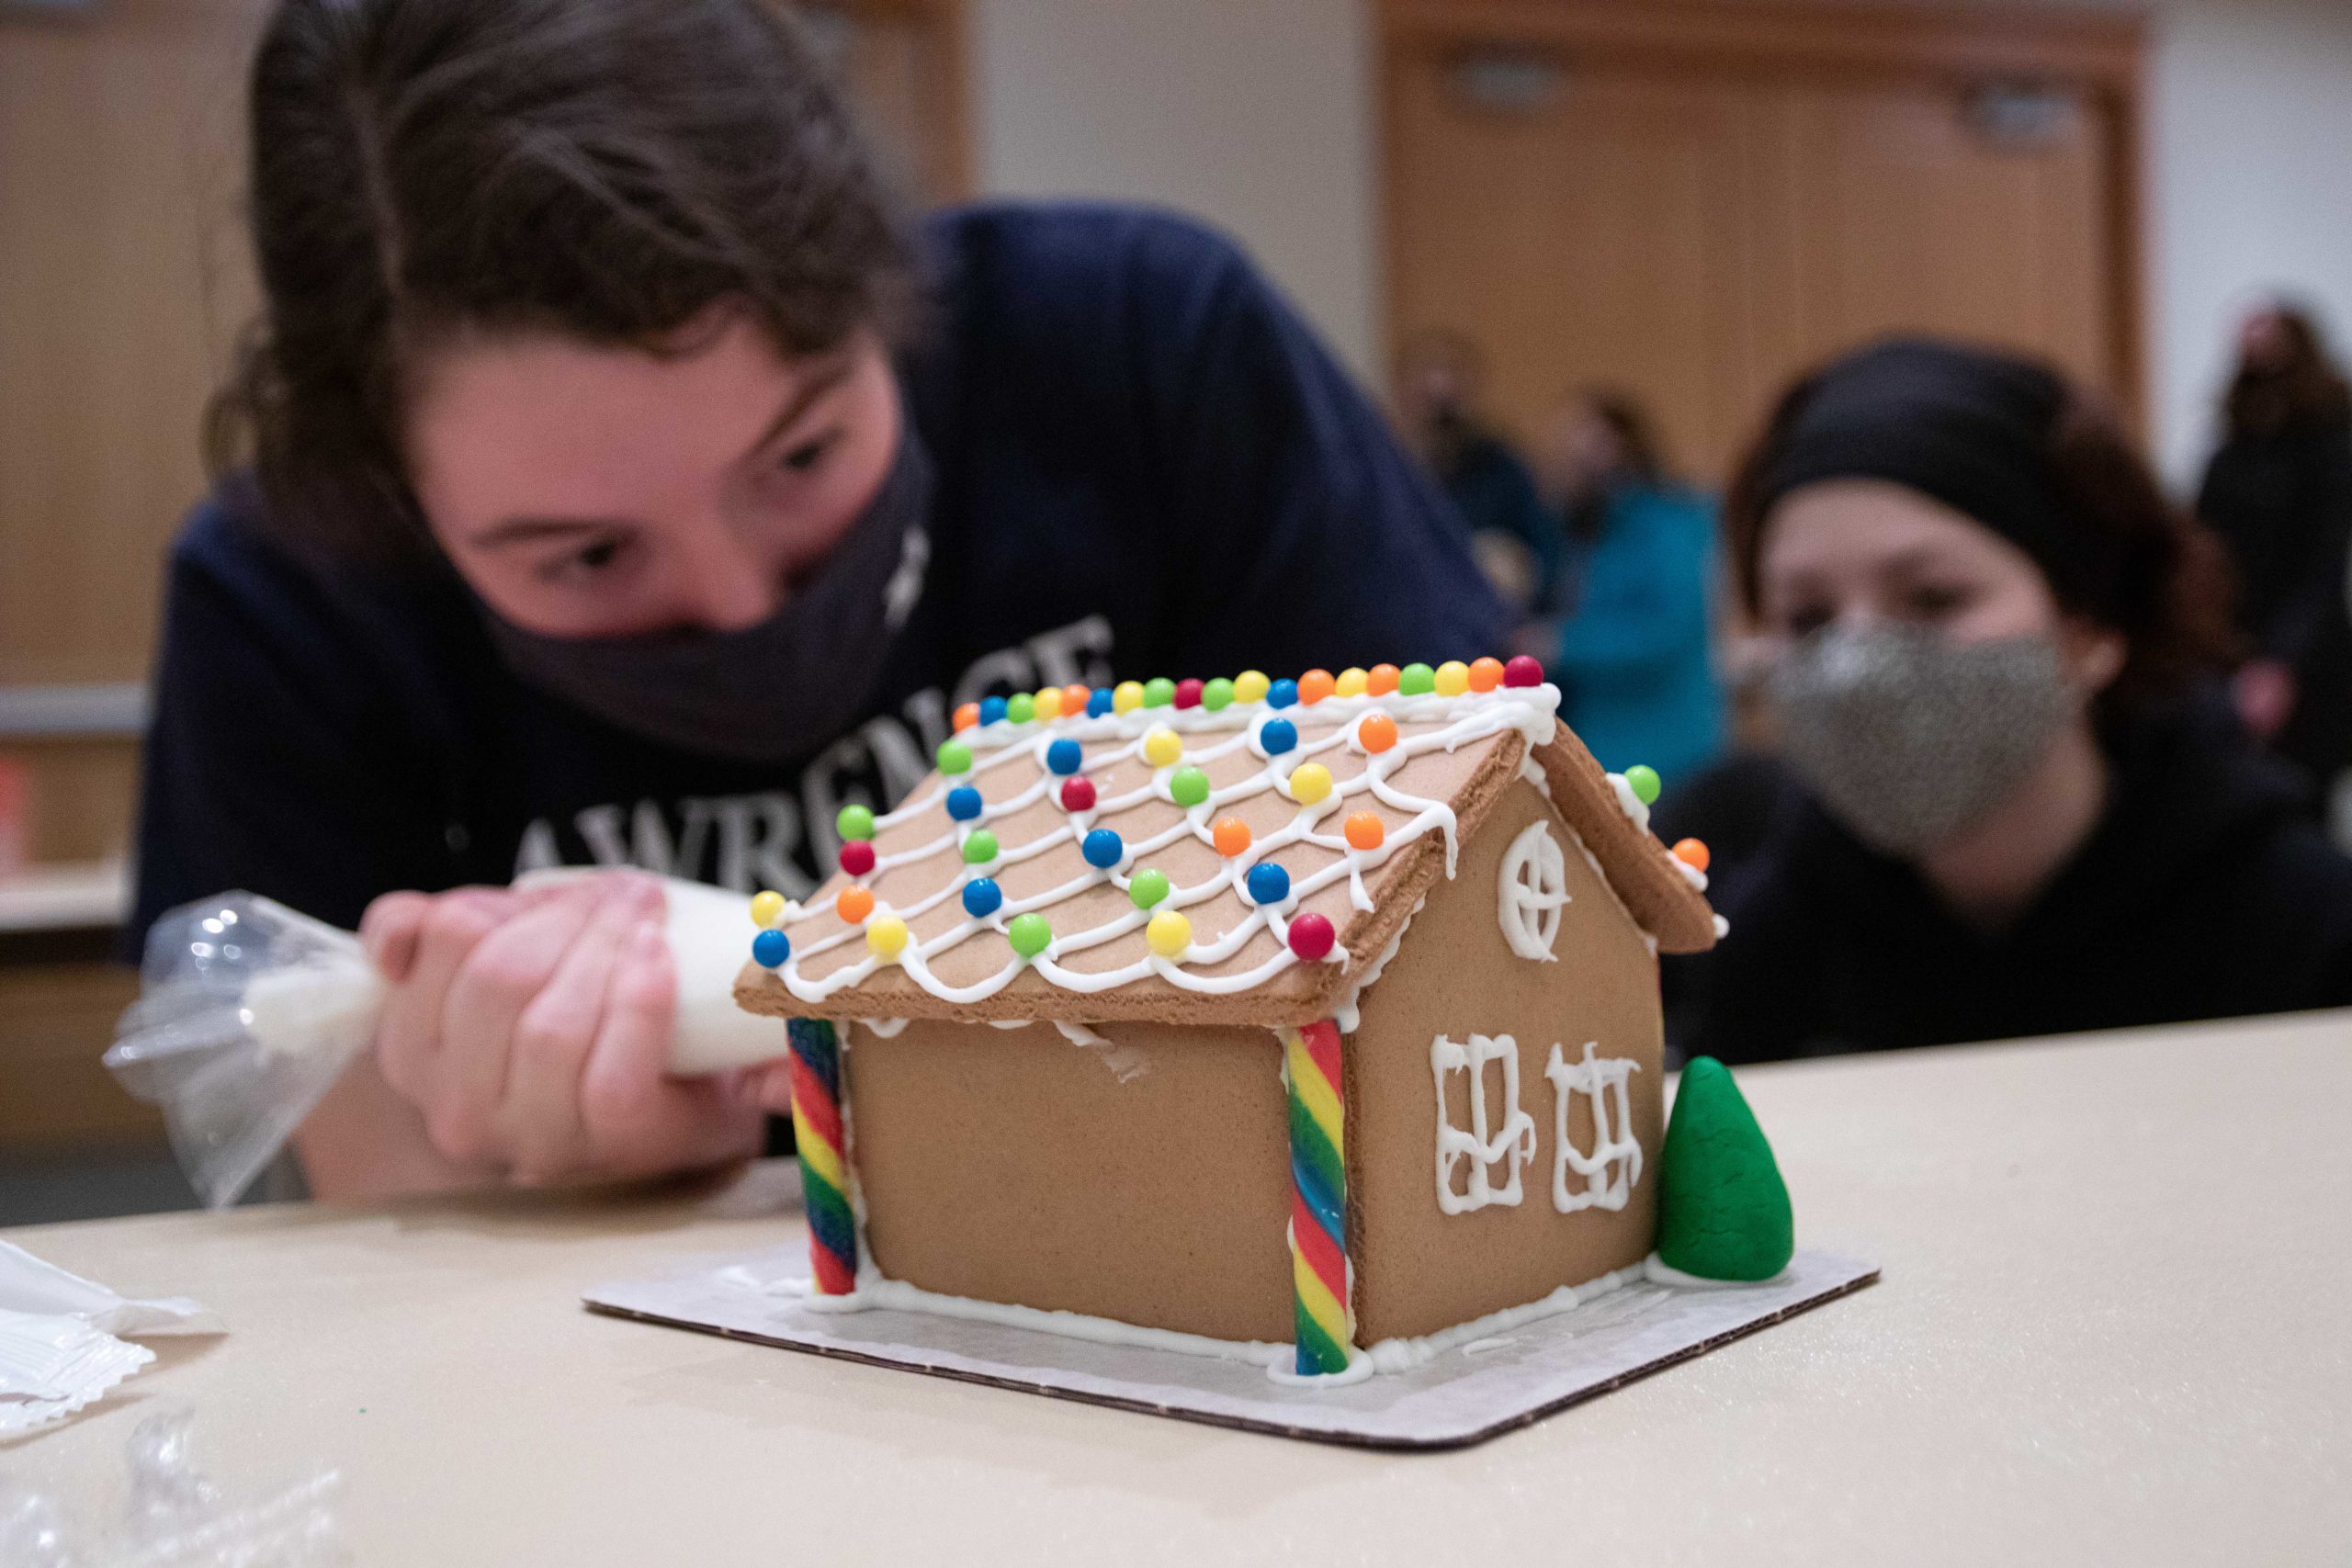 Masked student doctorates gingerbread house